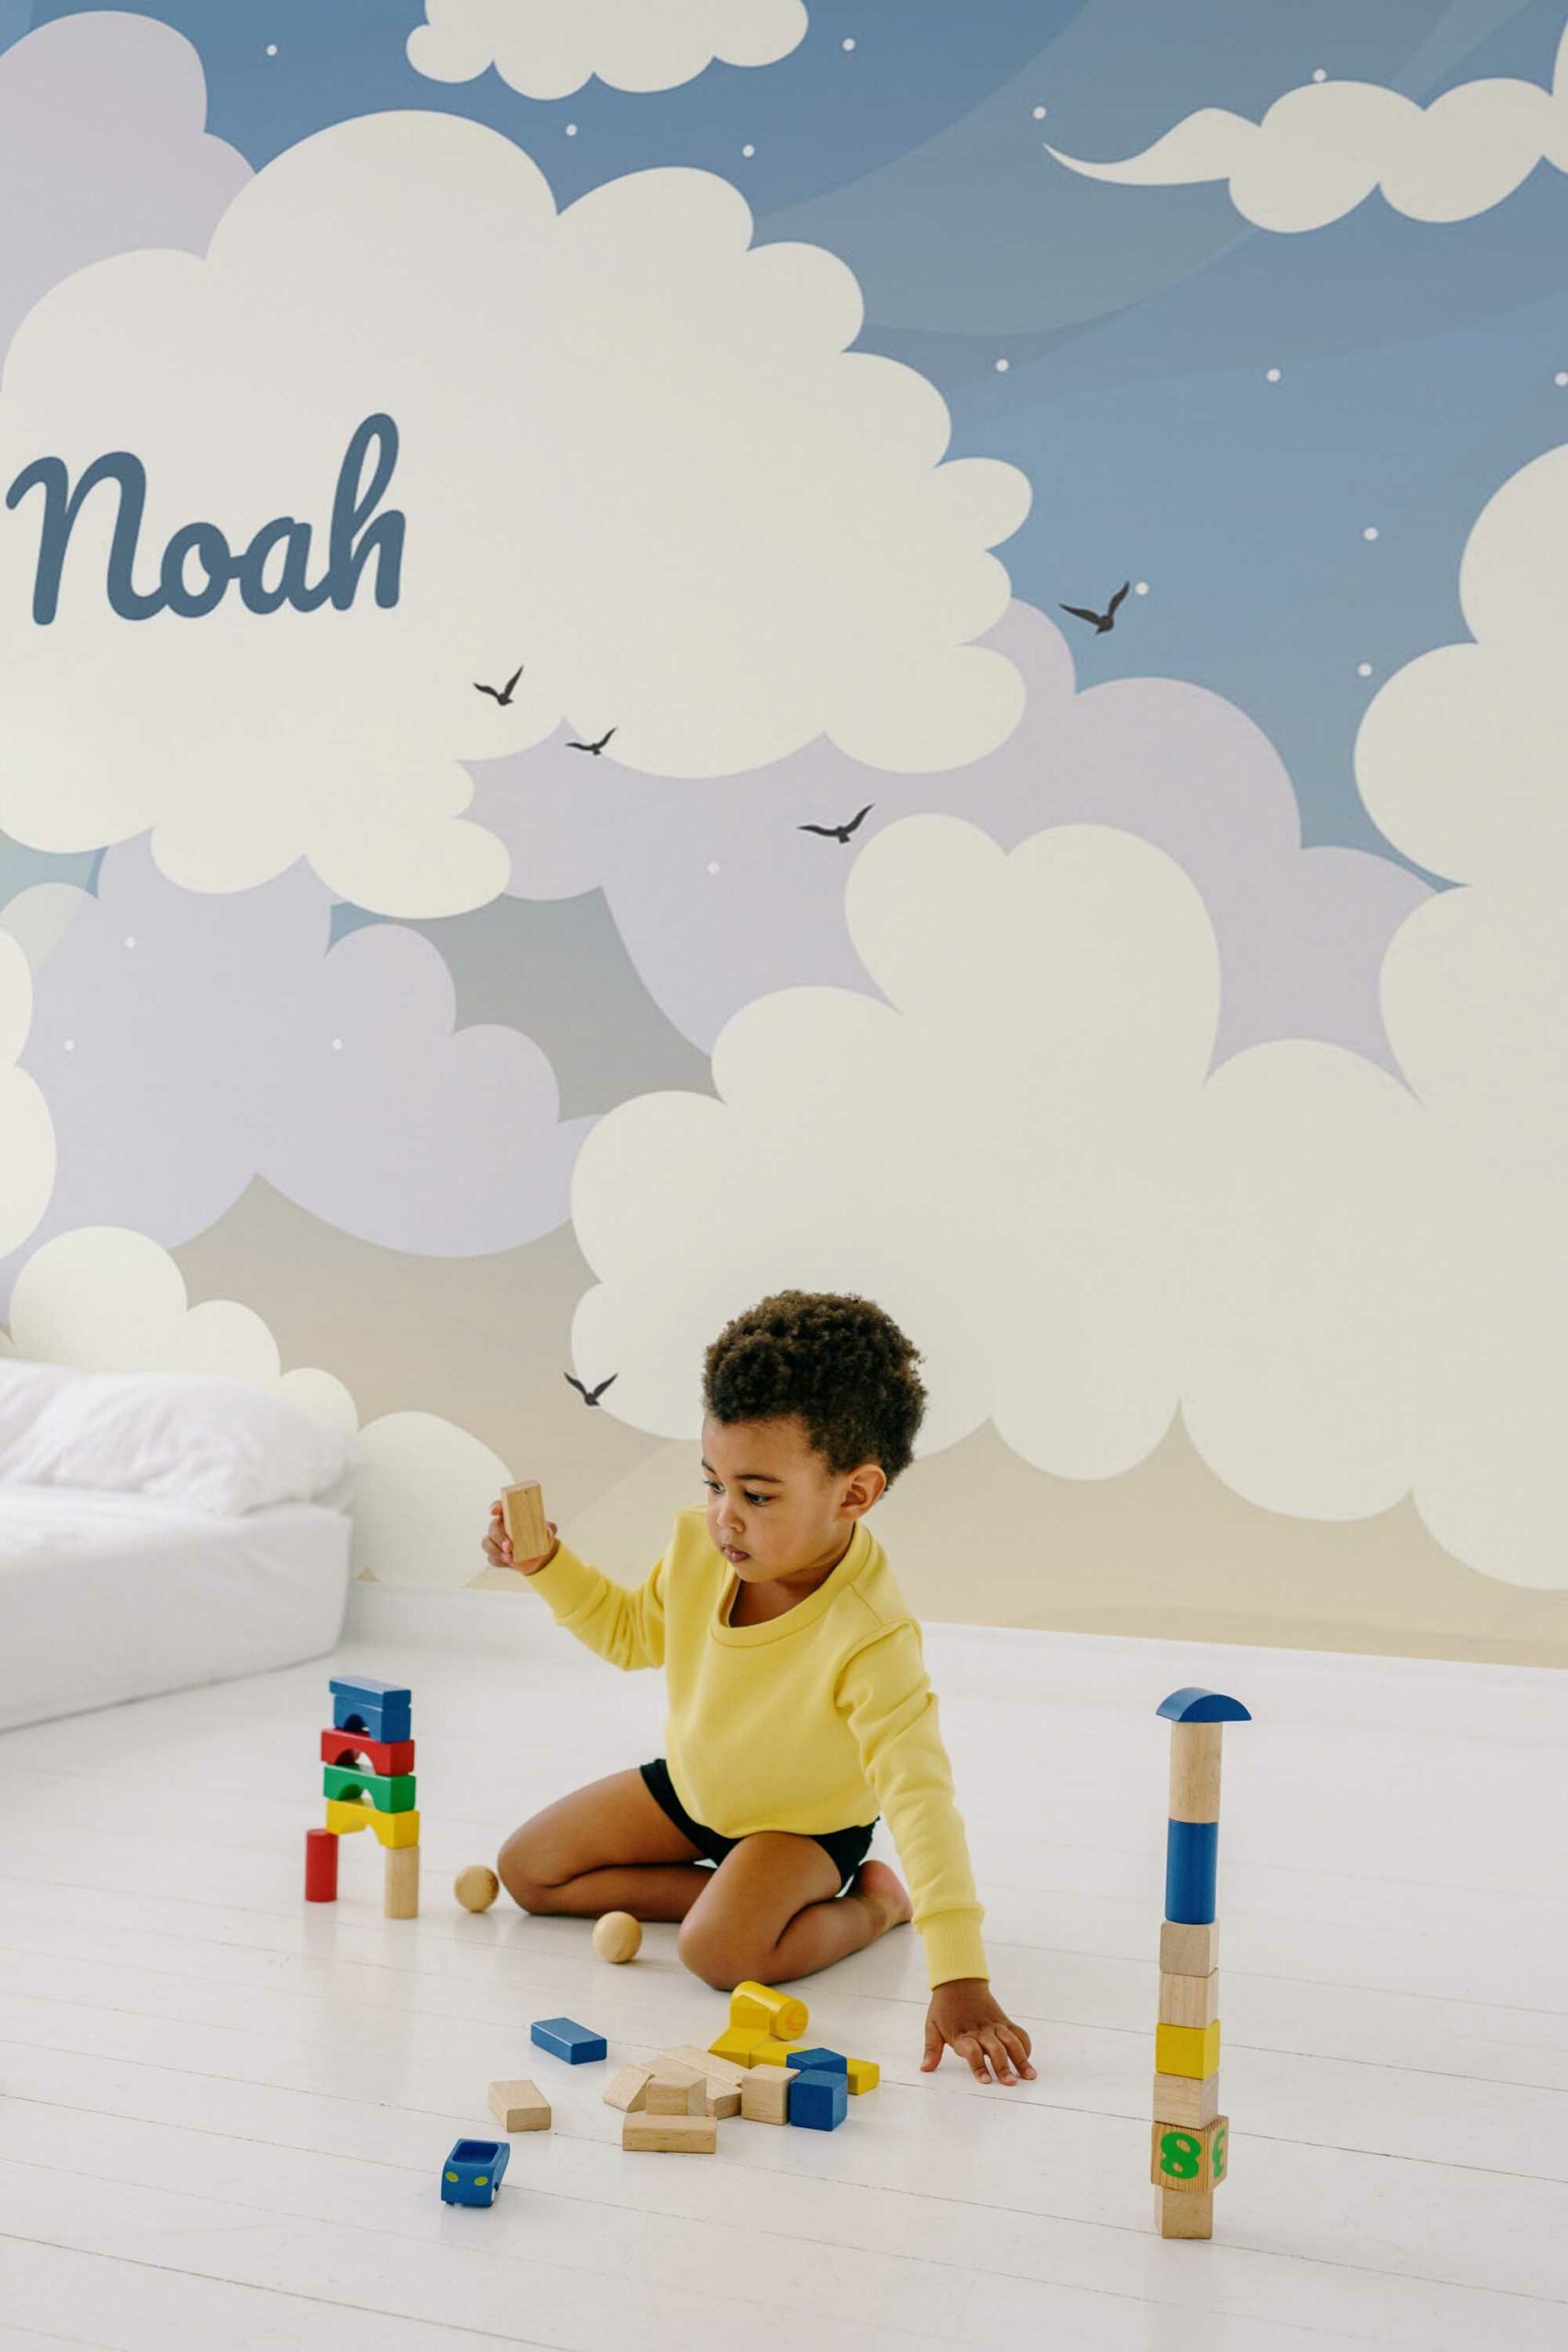 Self-adhesive wall mural in Blue Sky Baby's Name Cloudy design by Fancy Walls